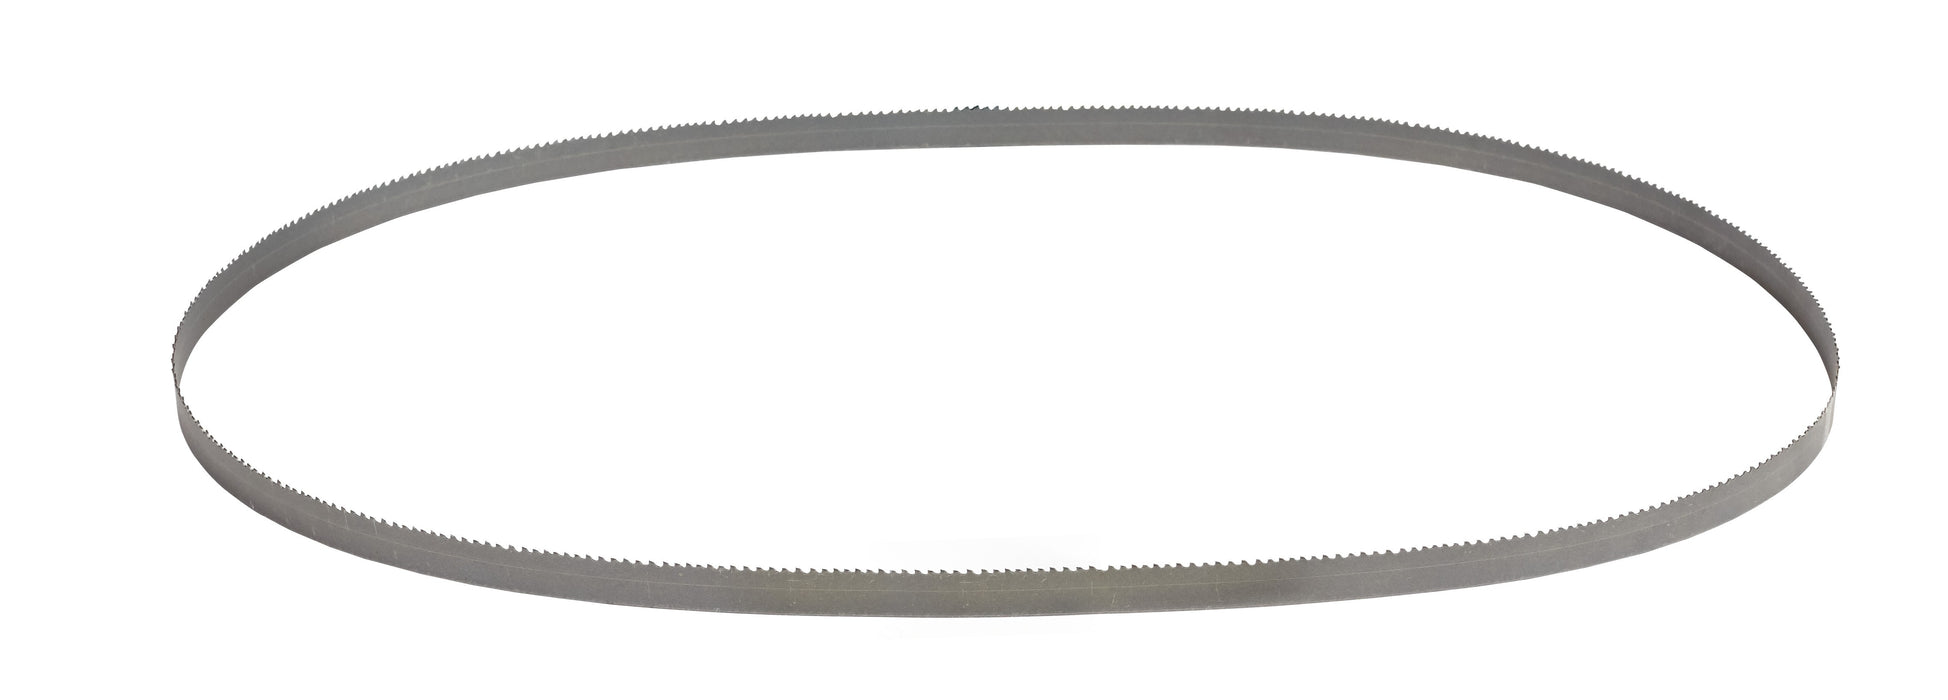 Milwaukee 48-39-0526 18 TPI Compact Band Saw Blades 25-Pack